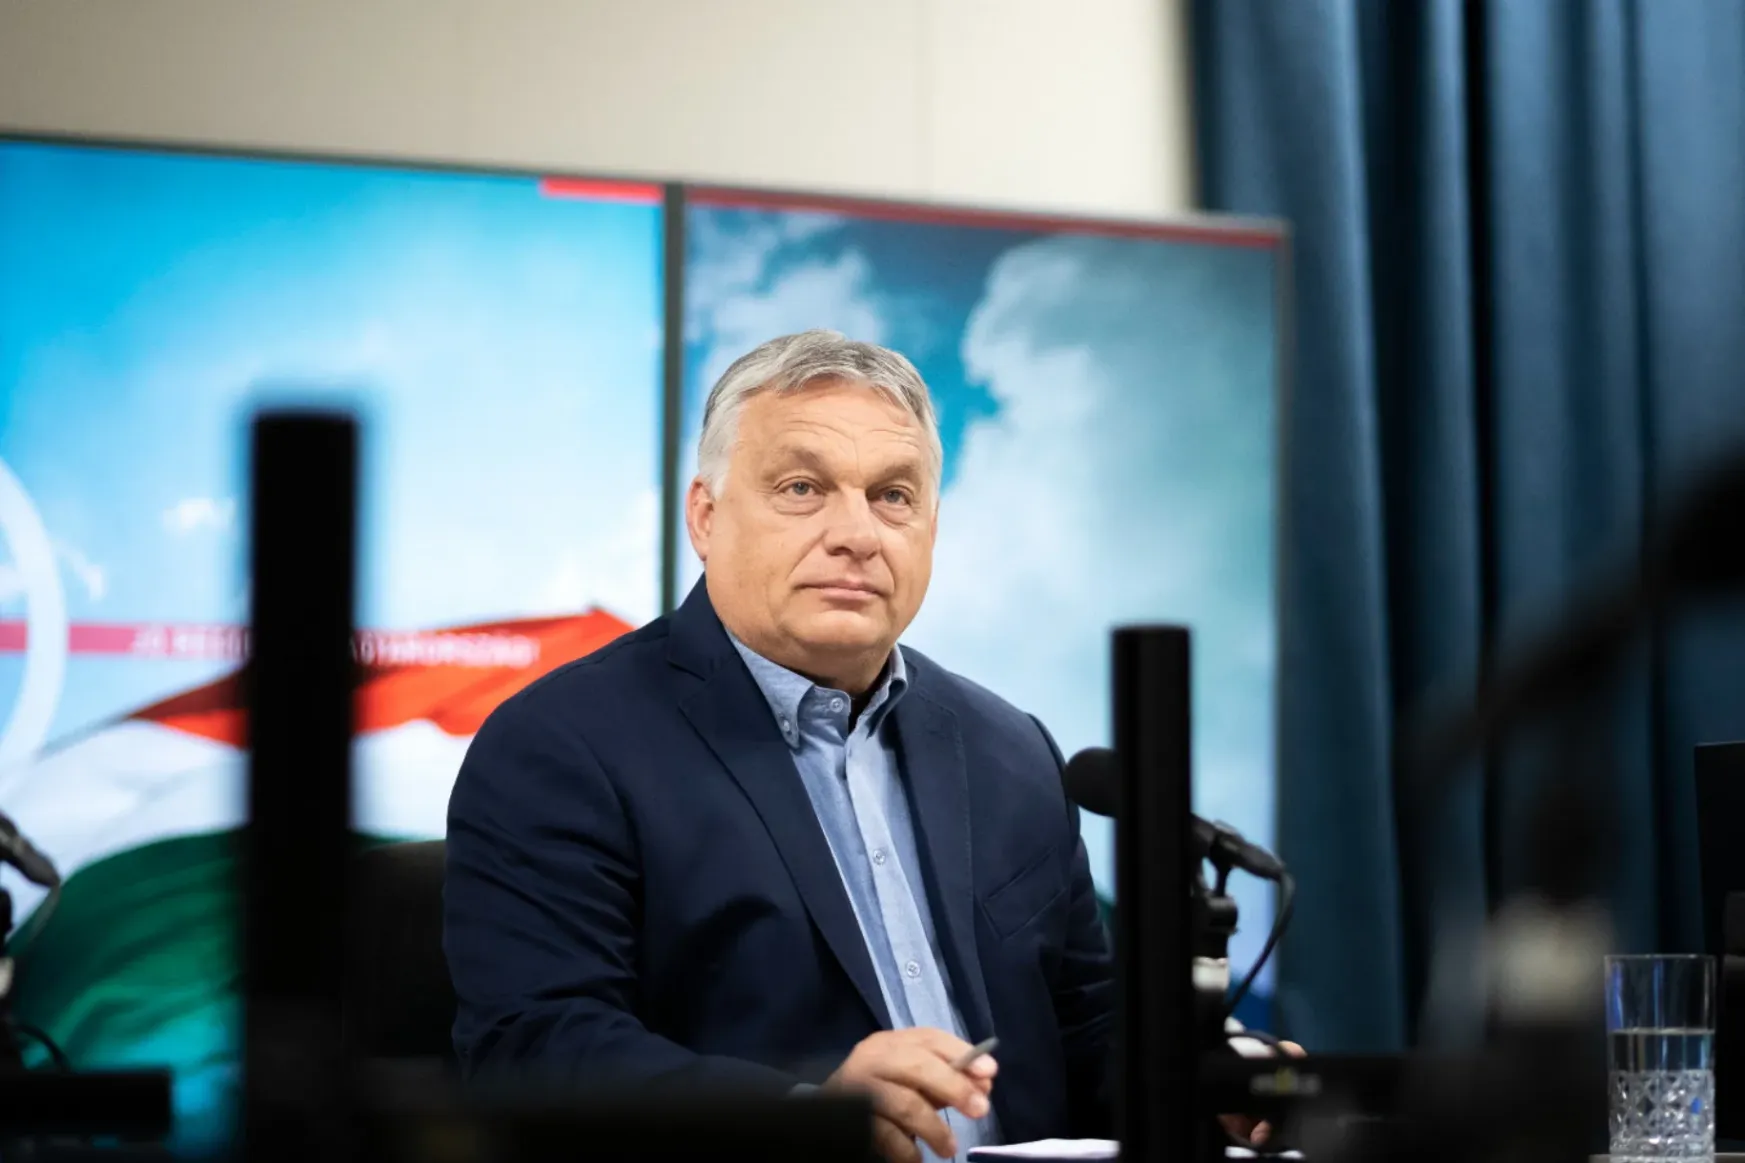 Orbán: This is a new era of European history